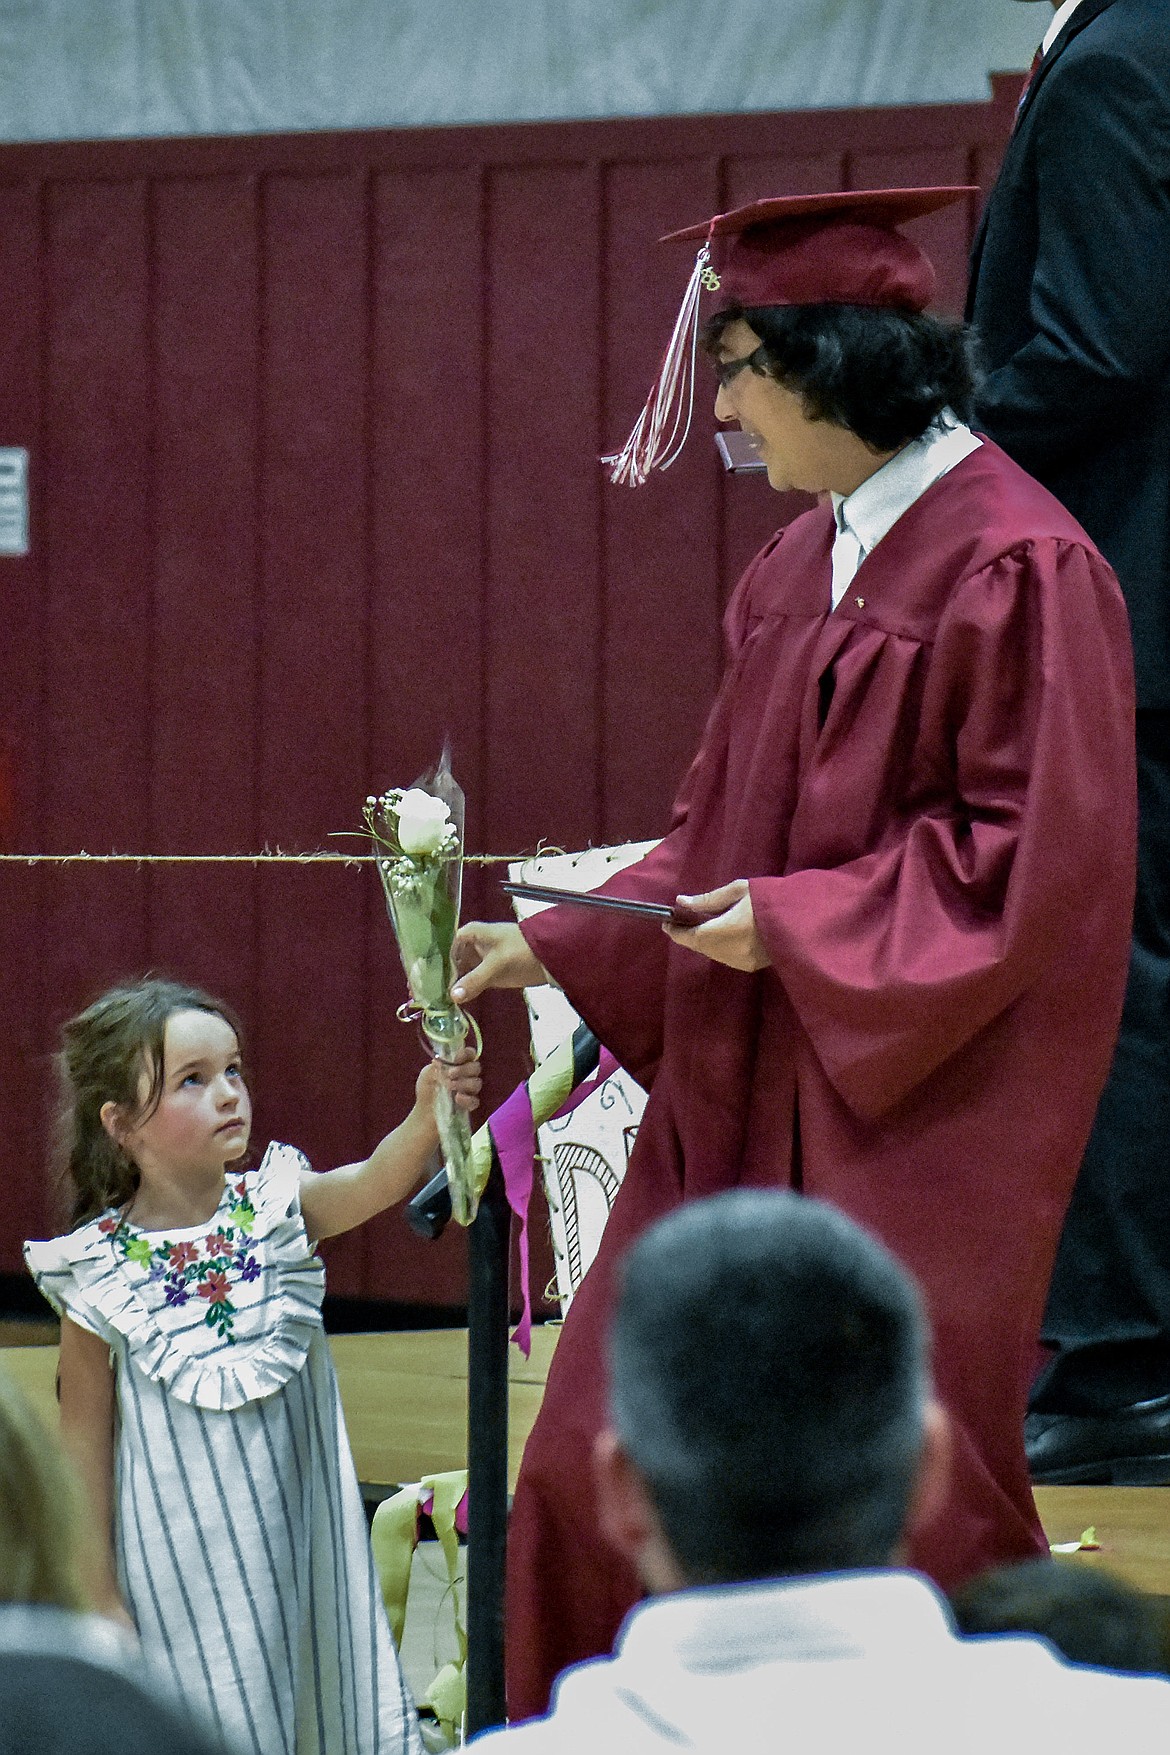 Flower girl Embry Cairns hands a white rose to Troy High School graduate Liam Hennsley as he leaves the stage after receiving his diploma during graduation ceremonies Saturday. (Ben Kibbey/The Western News)